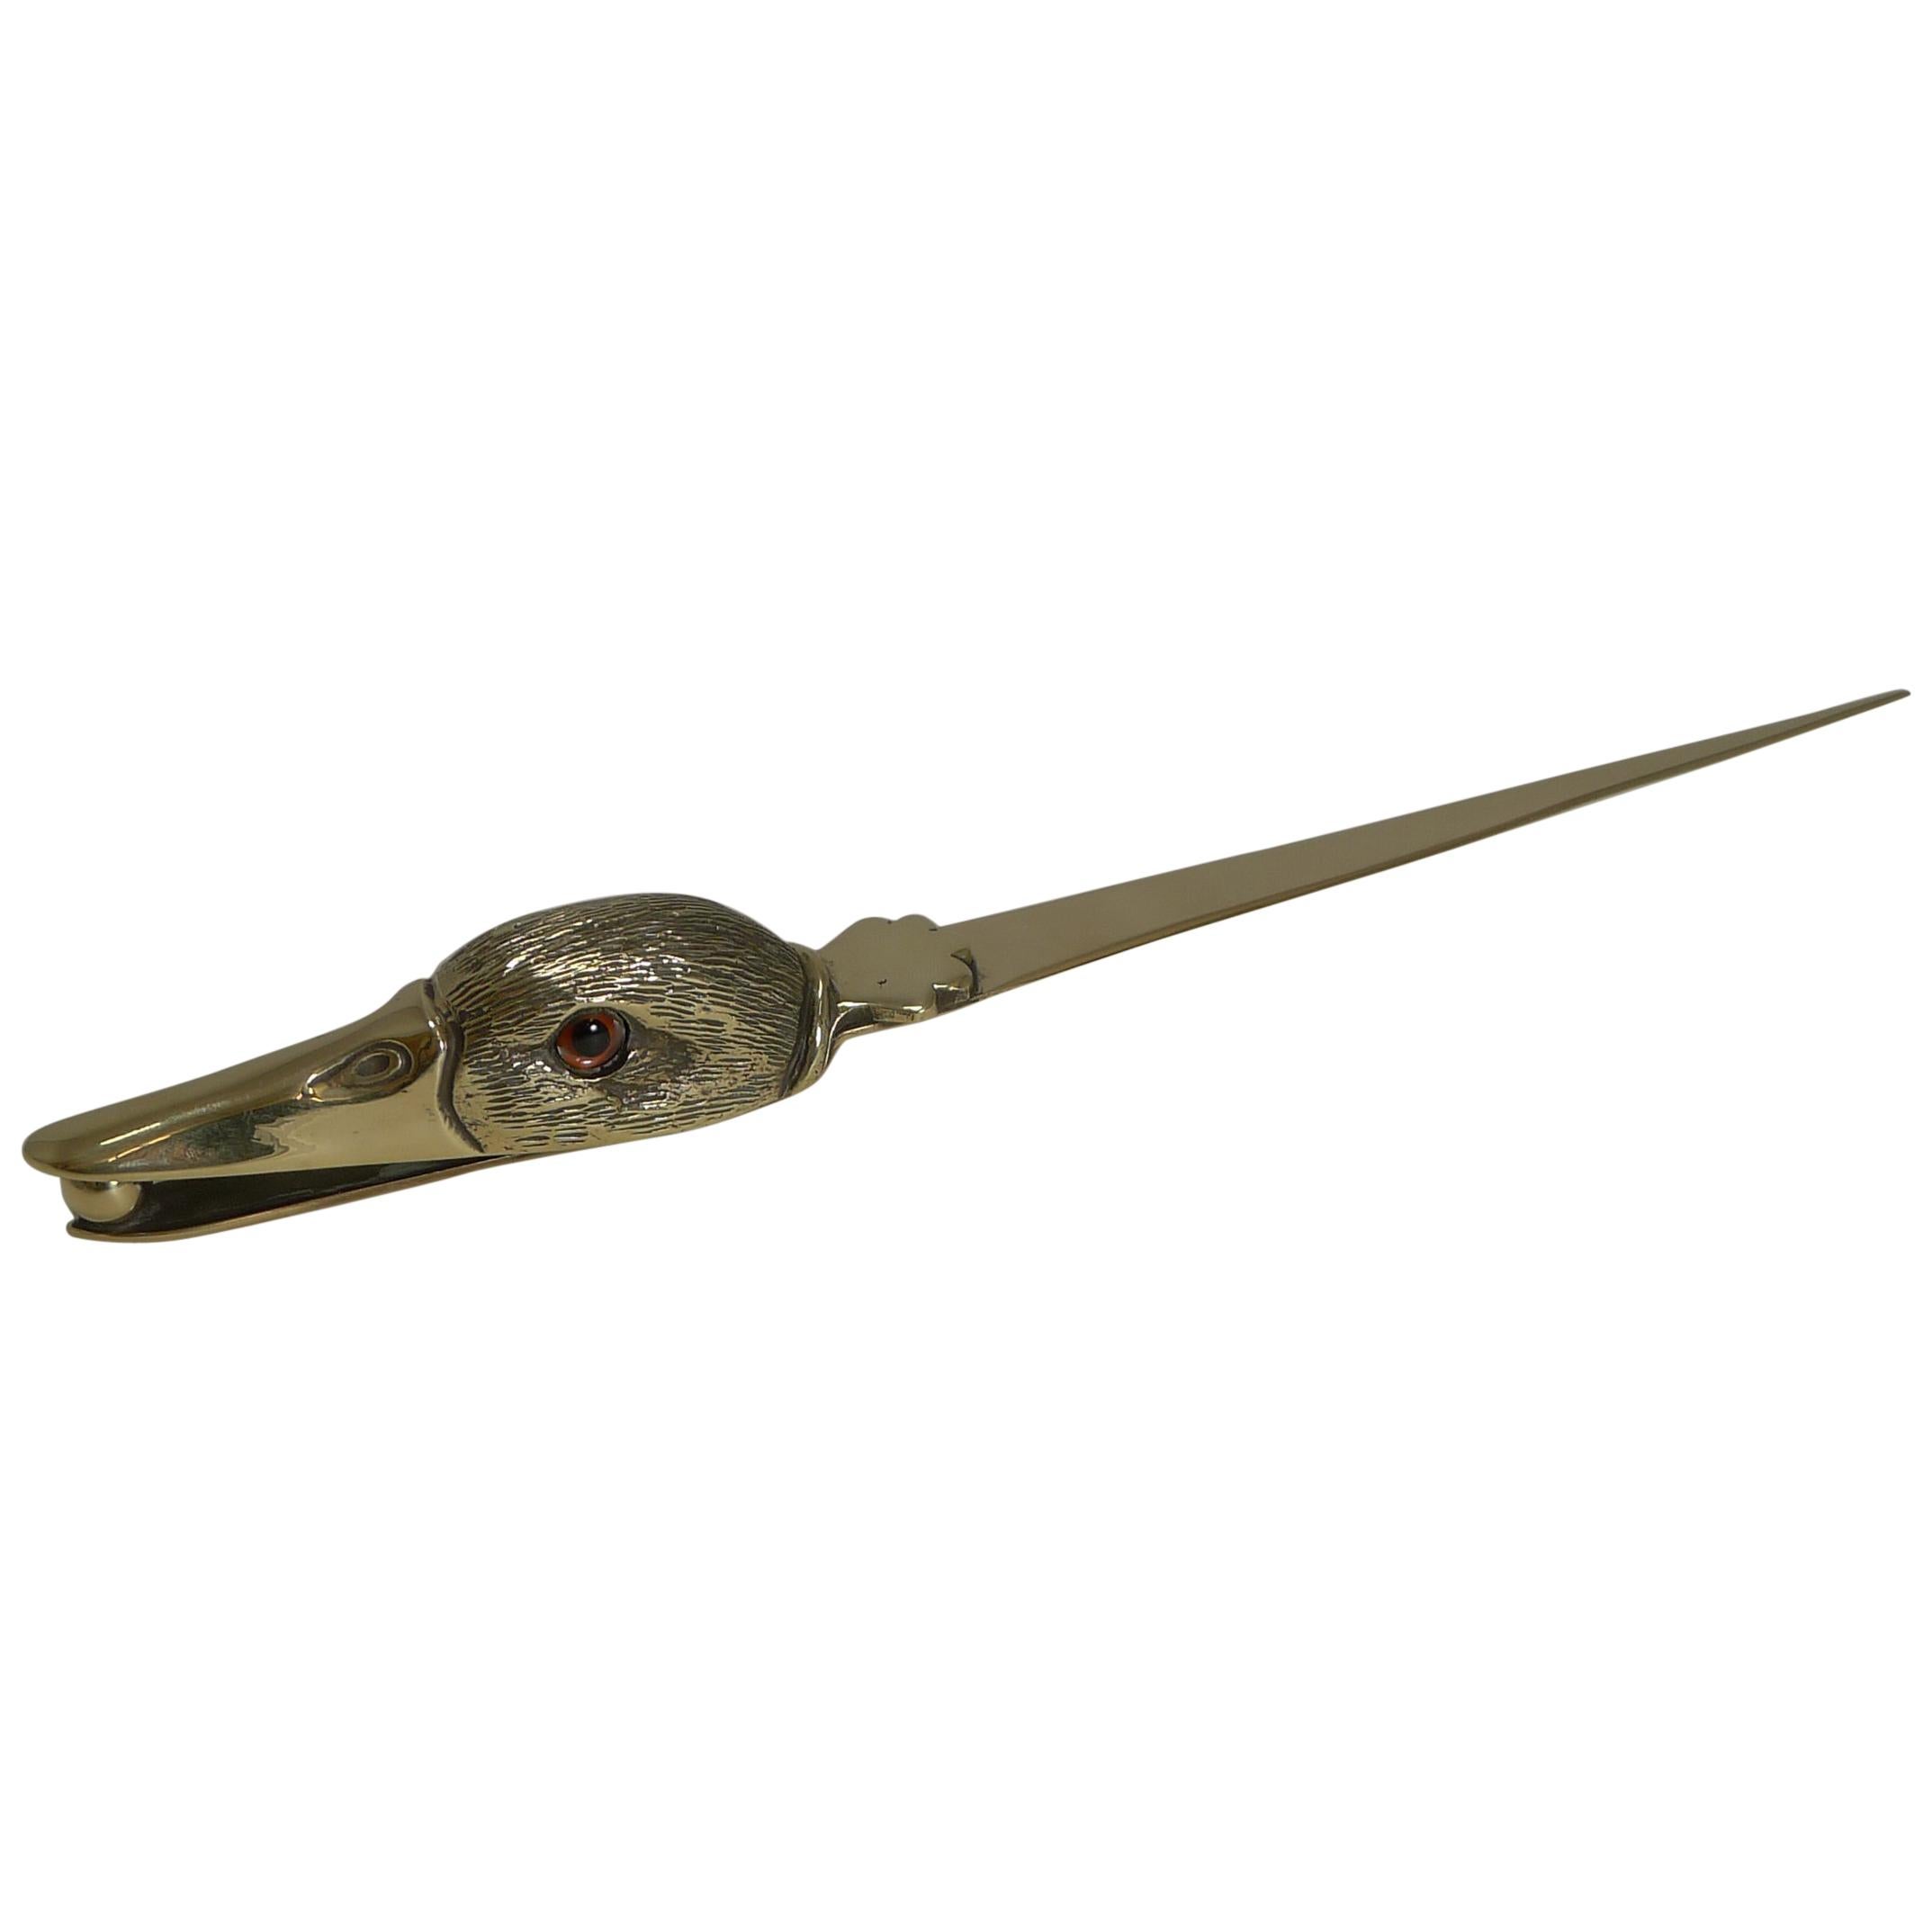 Antique Polished Brass Novelty Letter Opener, Duck With Glass Eyes, circa 1900